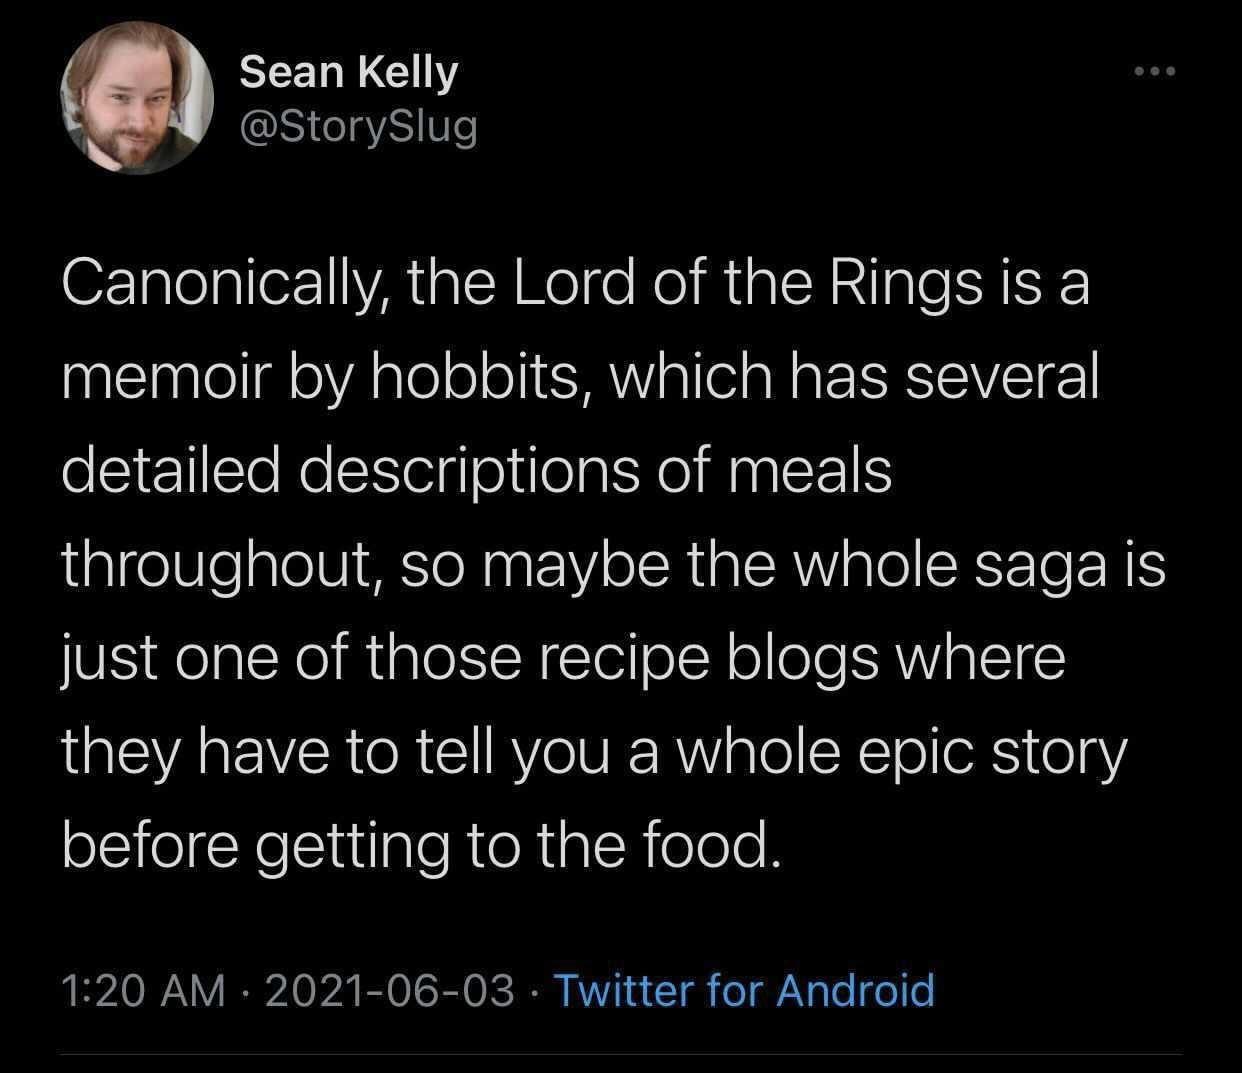 lord+of+the+rings+the+cook+book